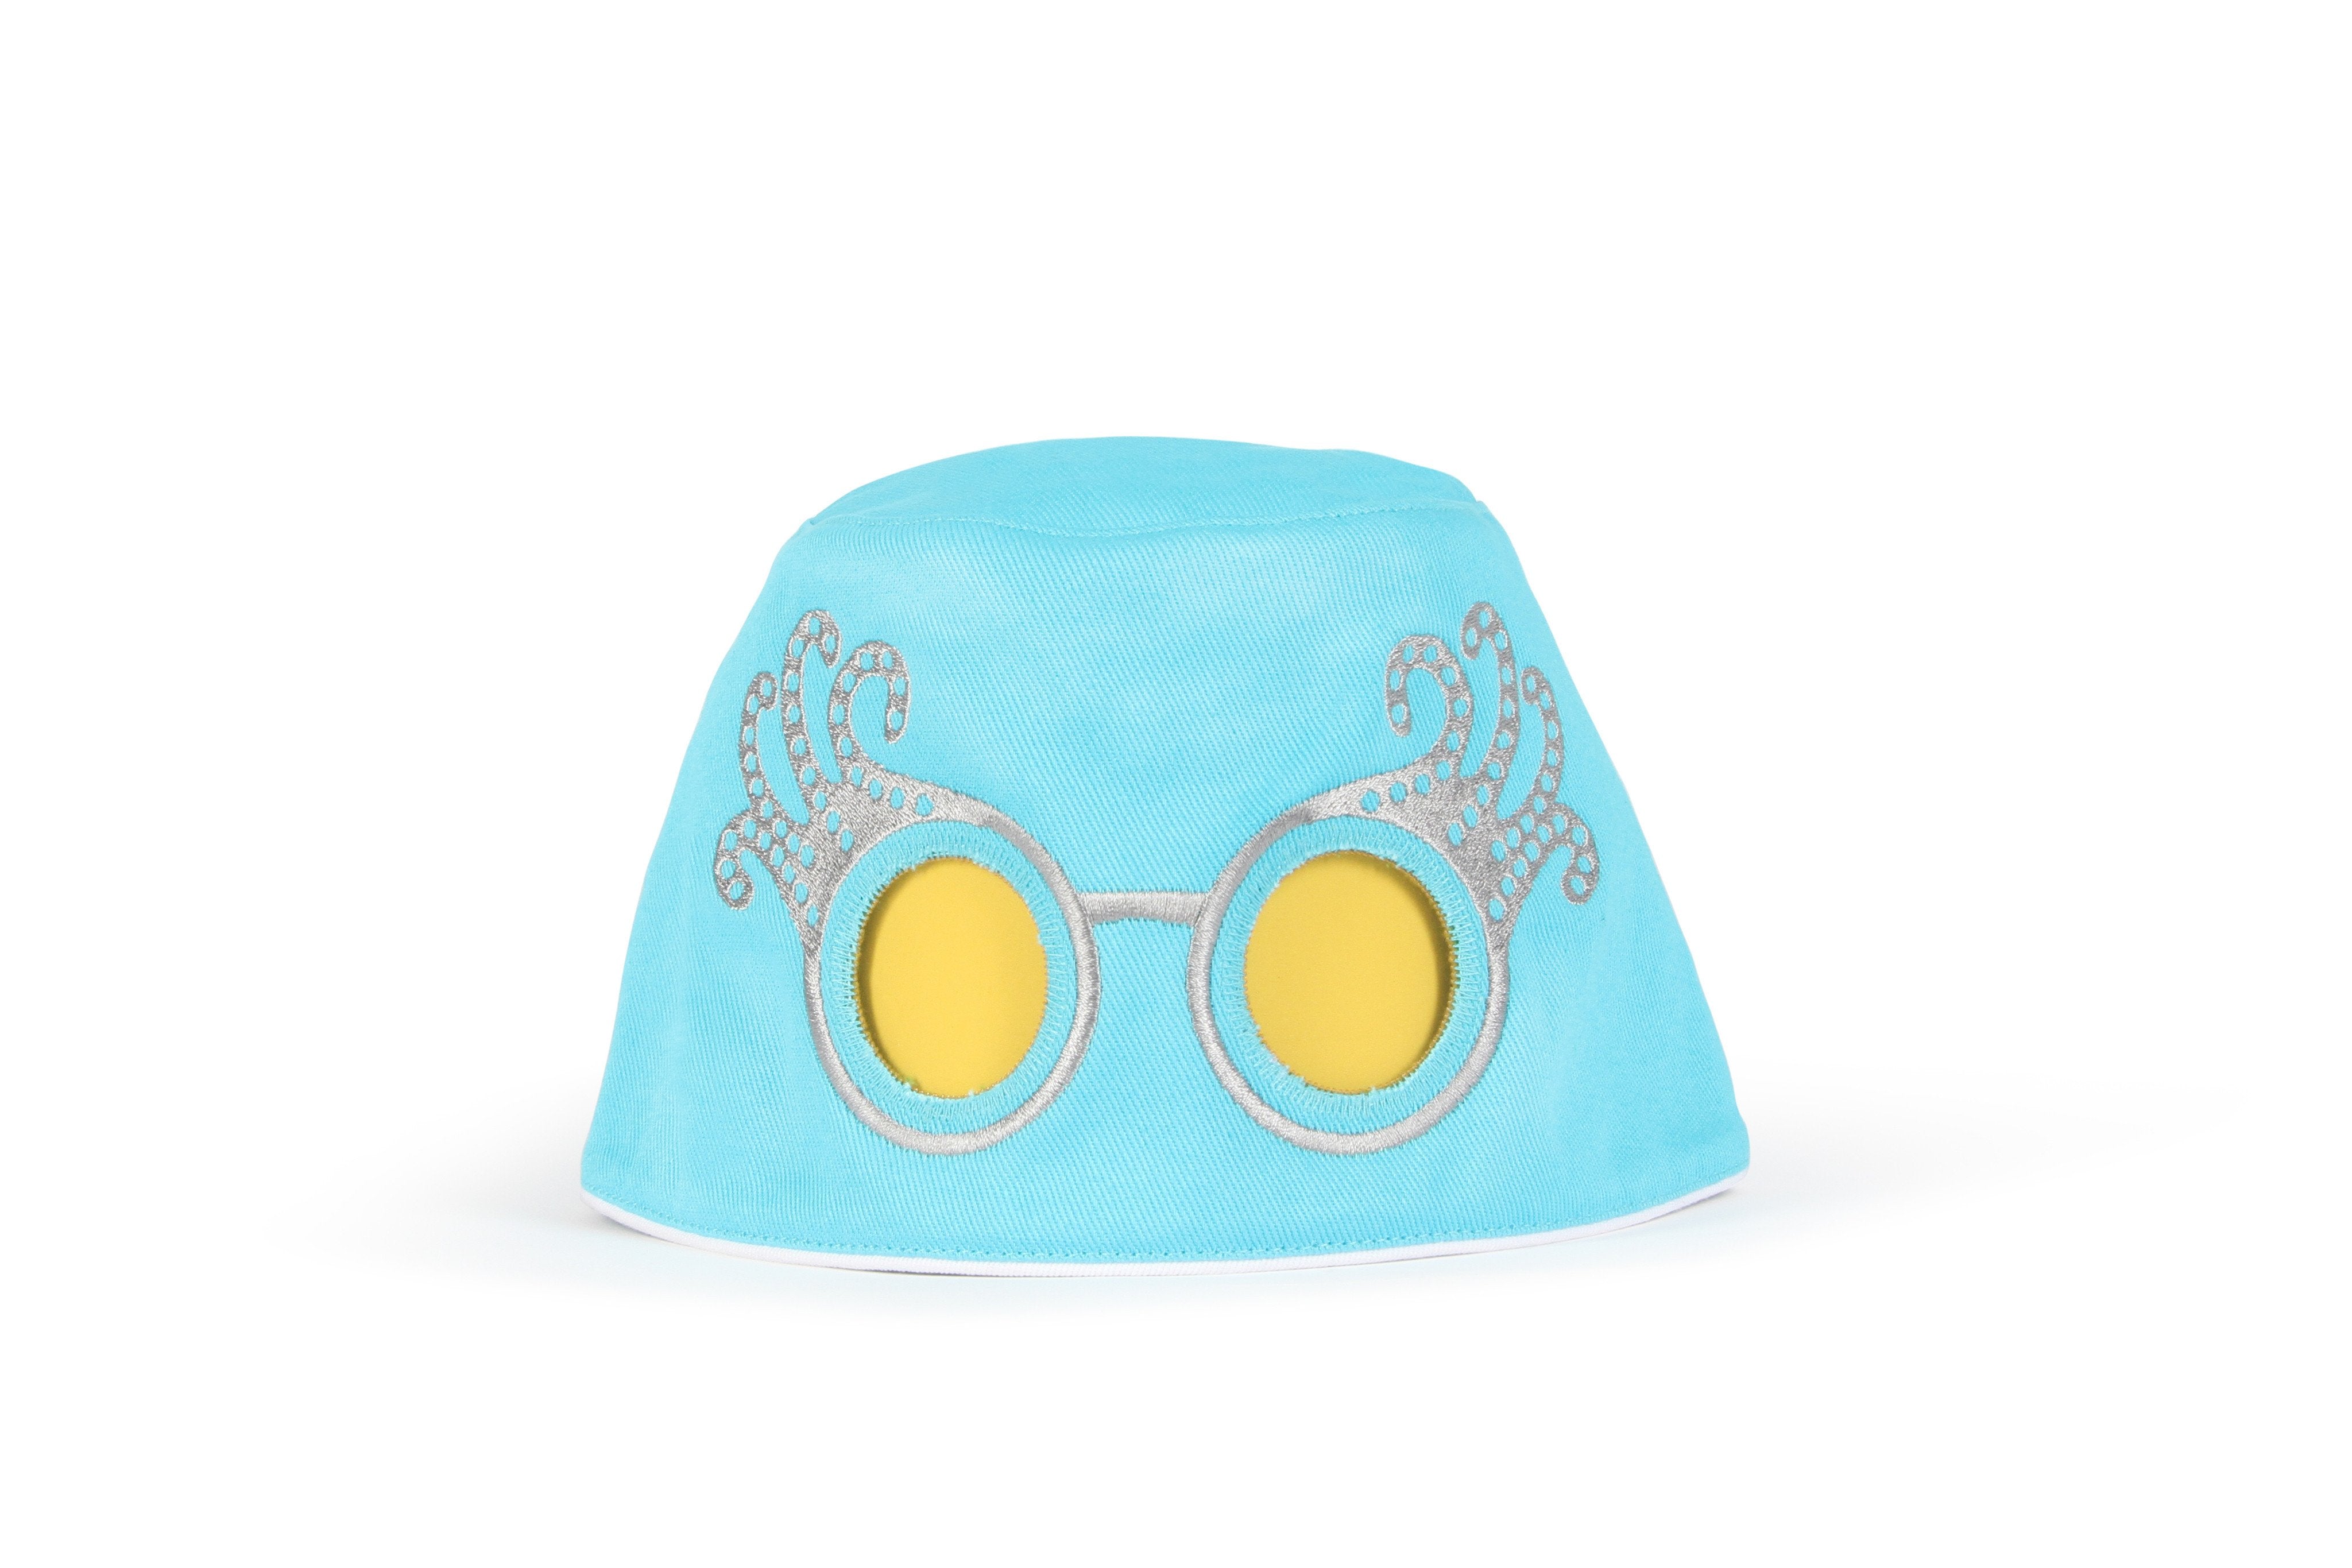 COOEEE Edna Sunglasses Hat Blue and Pink with Yellow Lenses by Boomerang Baby